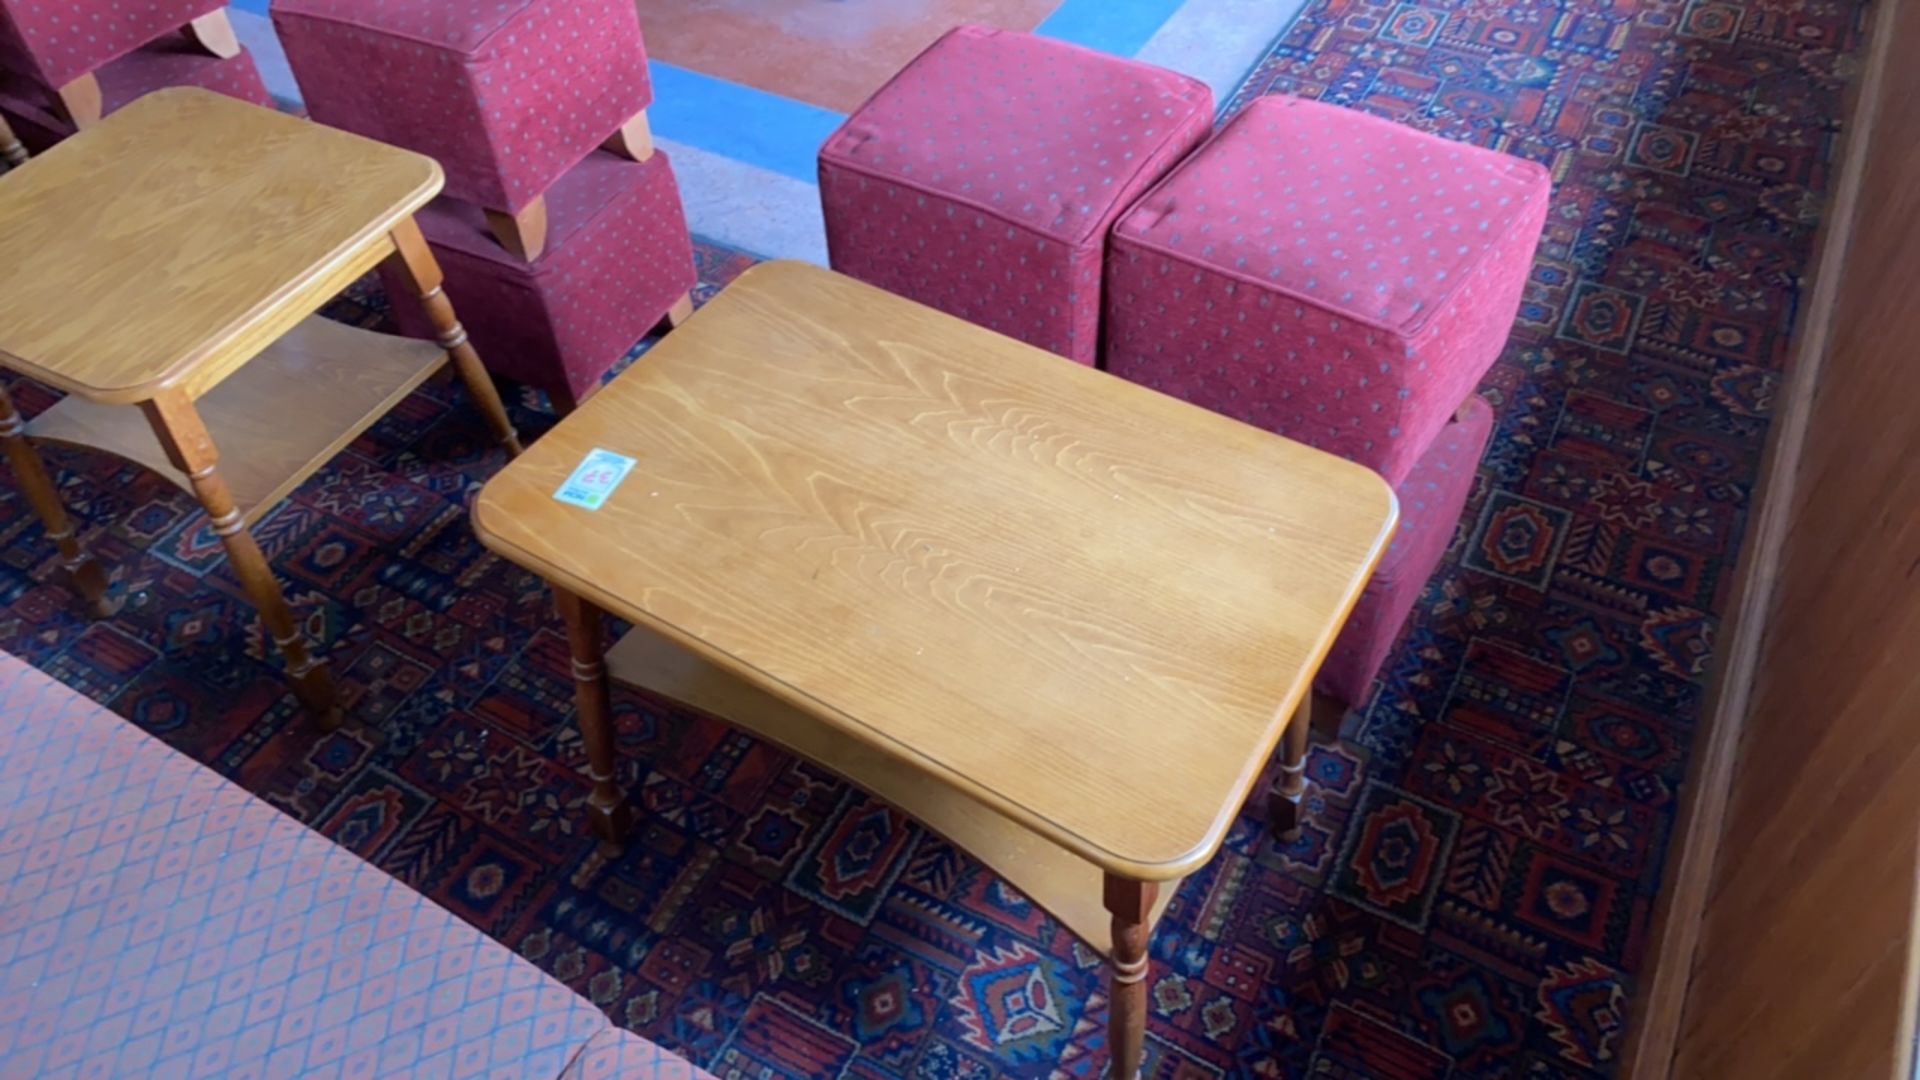 Rectangular Wooden Table With Four Pouffes - Image 4 of 4